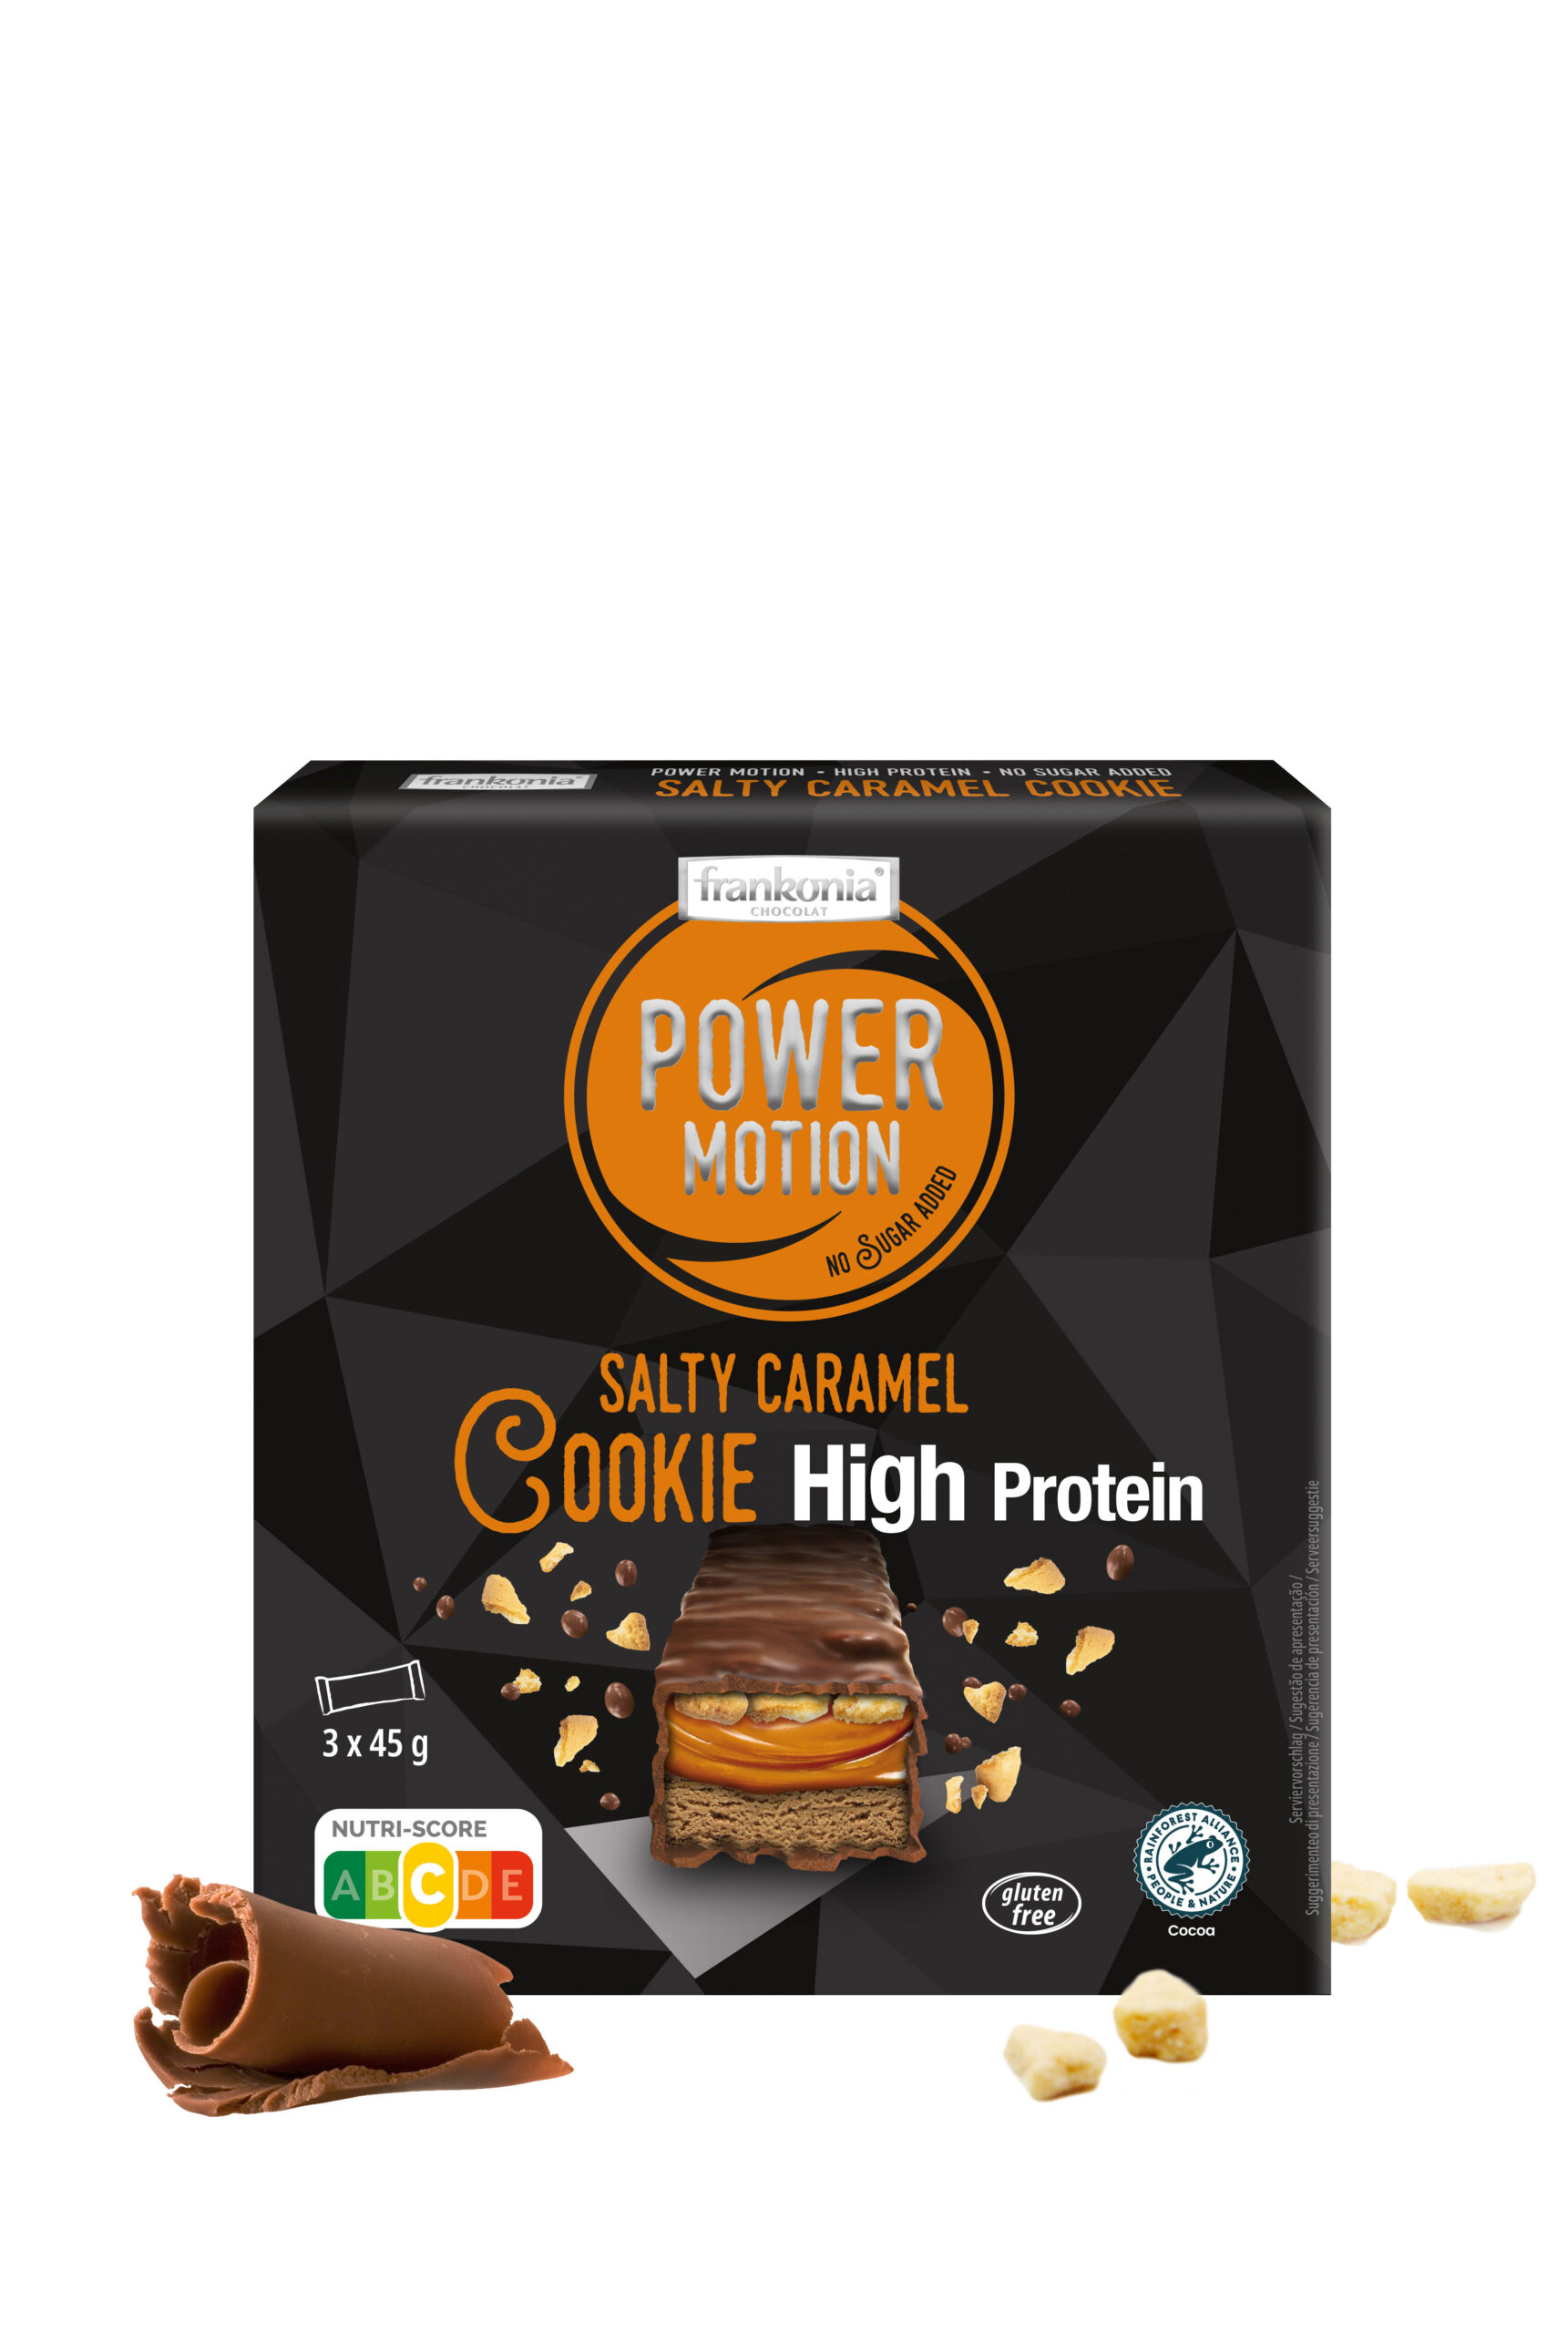 Power Motion Salty Caramel Cookie High Protein